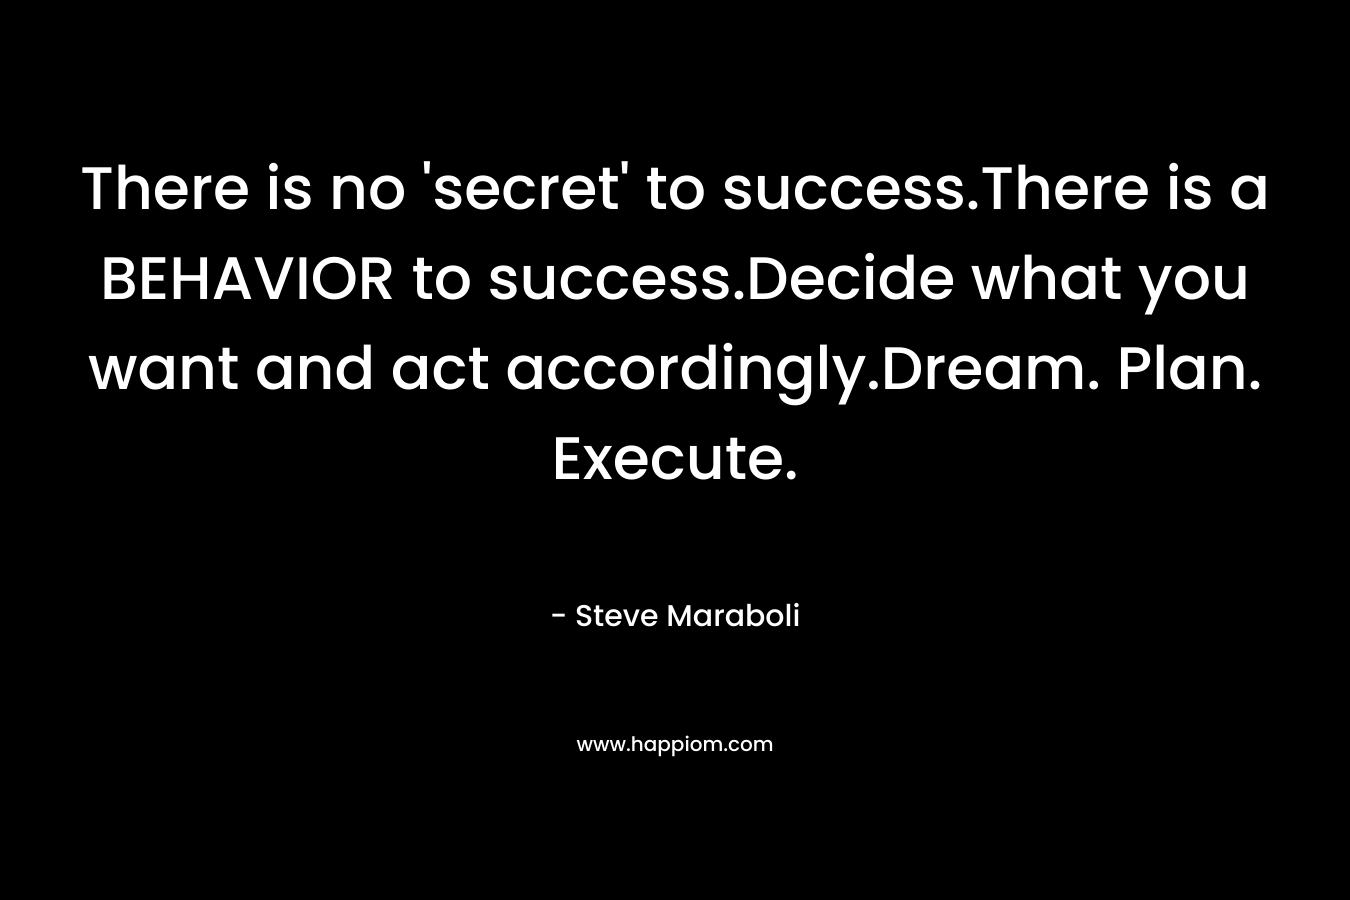 There is no 'secret' to success.There is a BEHAVIOR to success.Decide what you want and act accordingly.Dream. Plan. Execute.